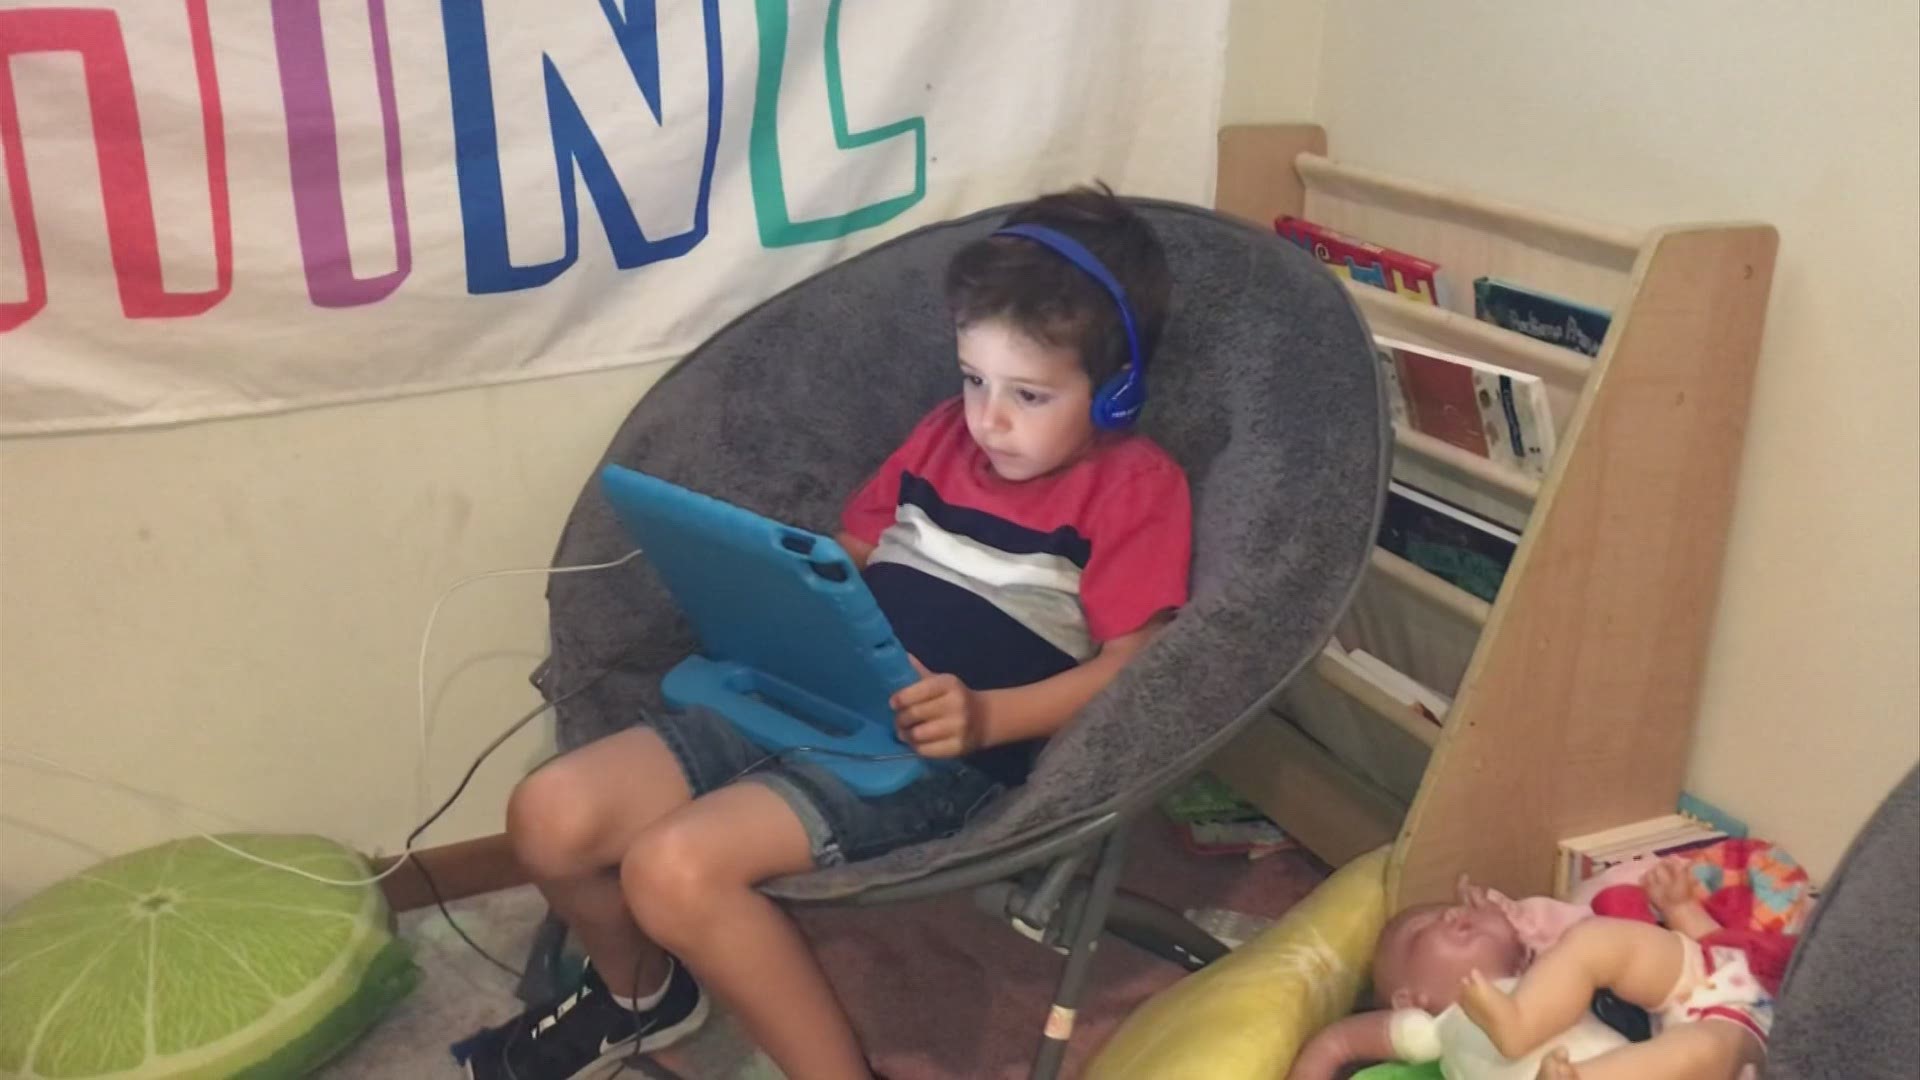 10TV has some tips to improve your at-home learning space.